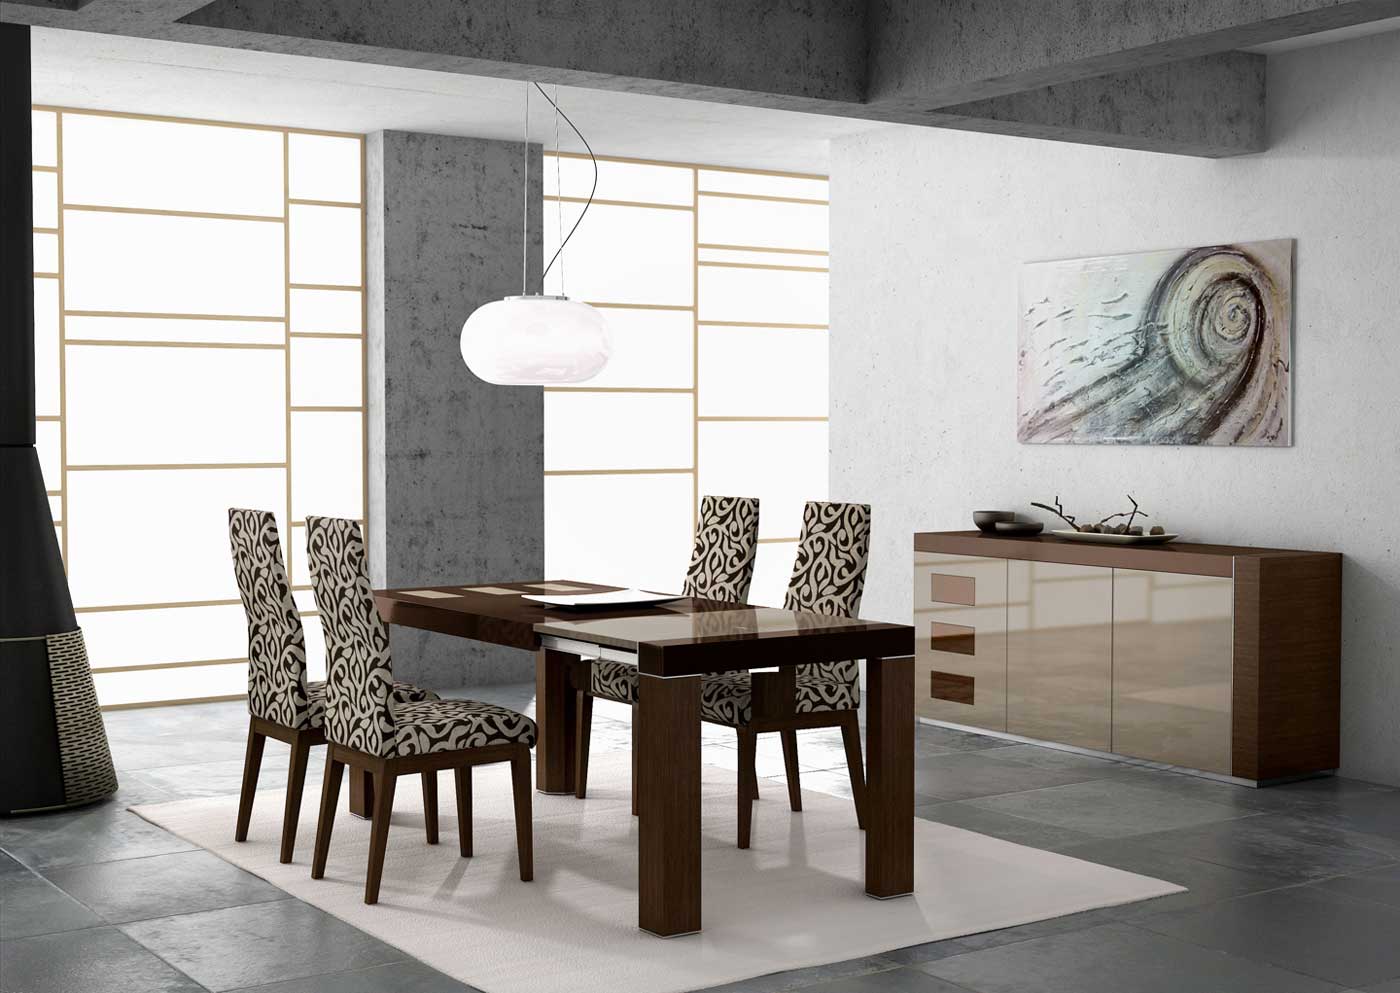 Dining Room Chairs Graceful Dining Room Furniture Wooden Chairs Sets With Modern Wooden Dining Room Design And Assorted Color Chairs Cover Also Contemporary Pendant Lamp Dining Room Model Ideas Dining Room Wooden Stylish Of Dining Room Chairs